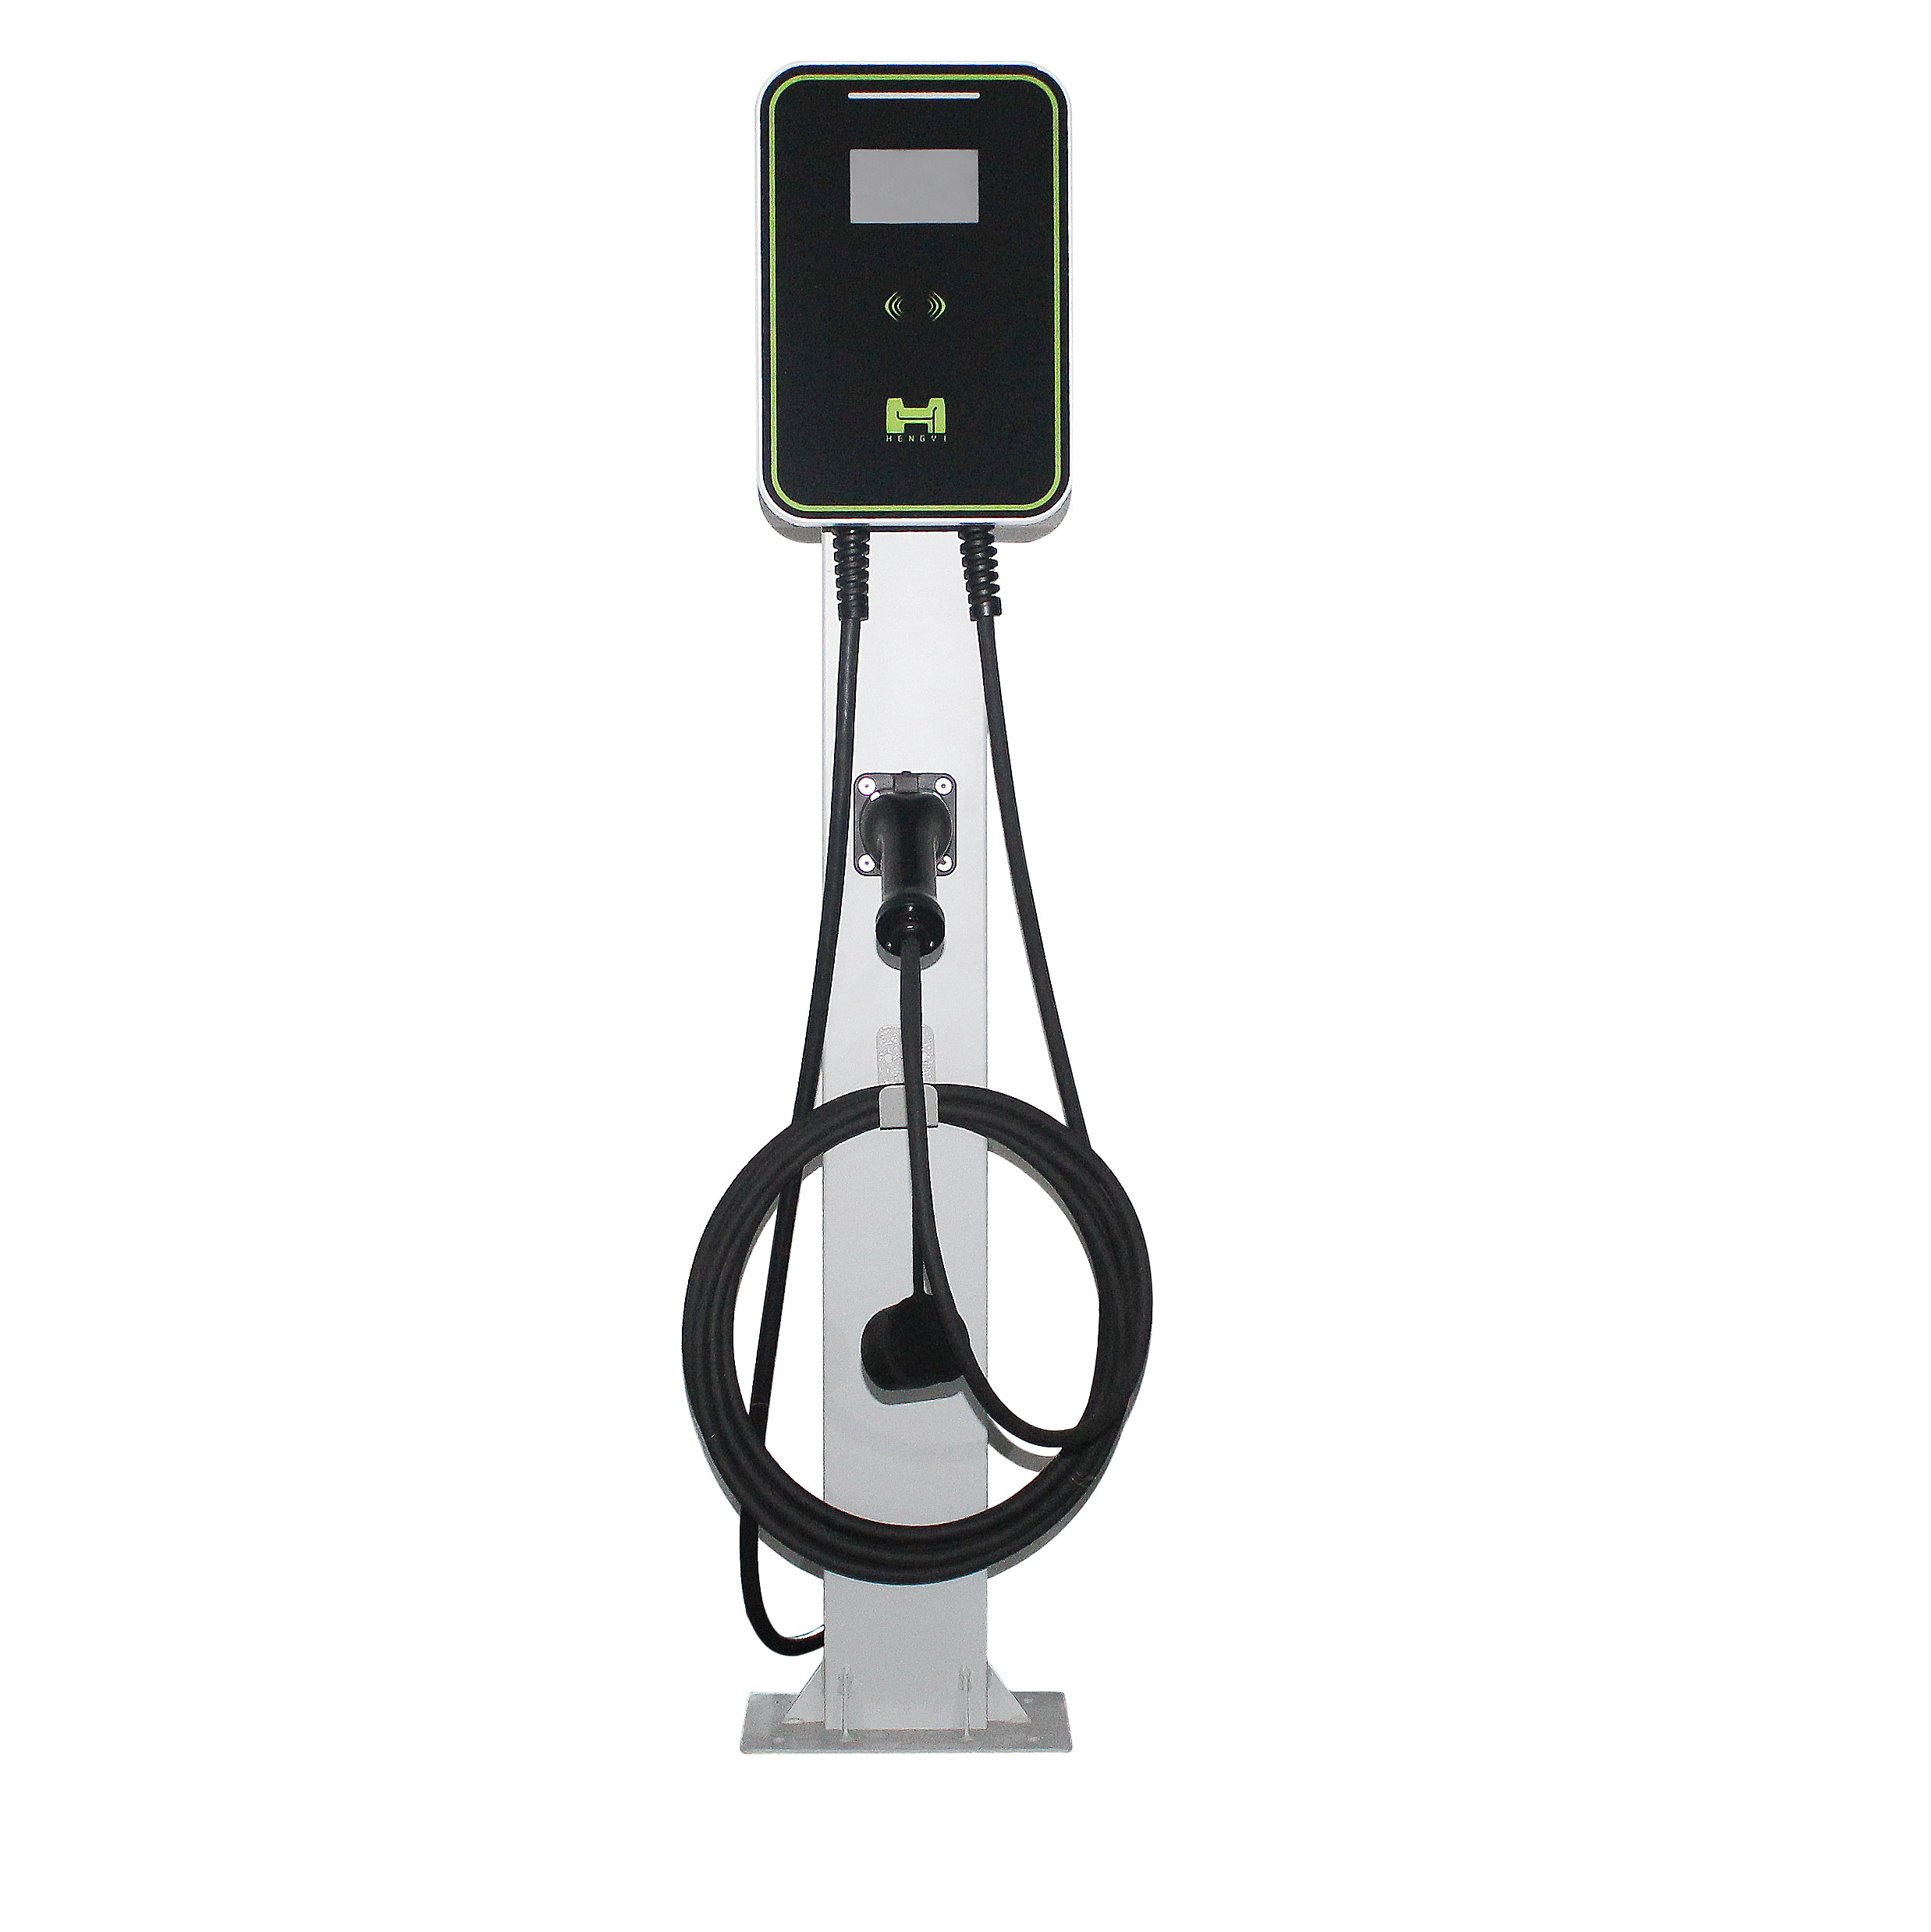 WALLBOX 7 kW - EV Charging with LED Display 7kW / Type 2 / 230V AC Charger  - Bestchargers